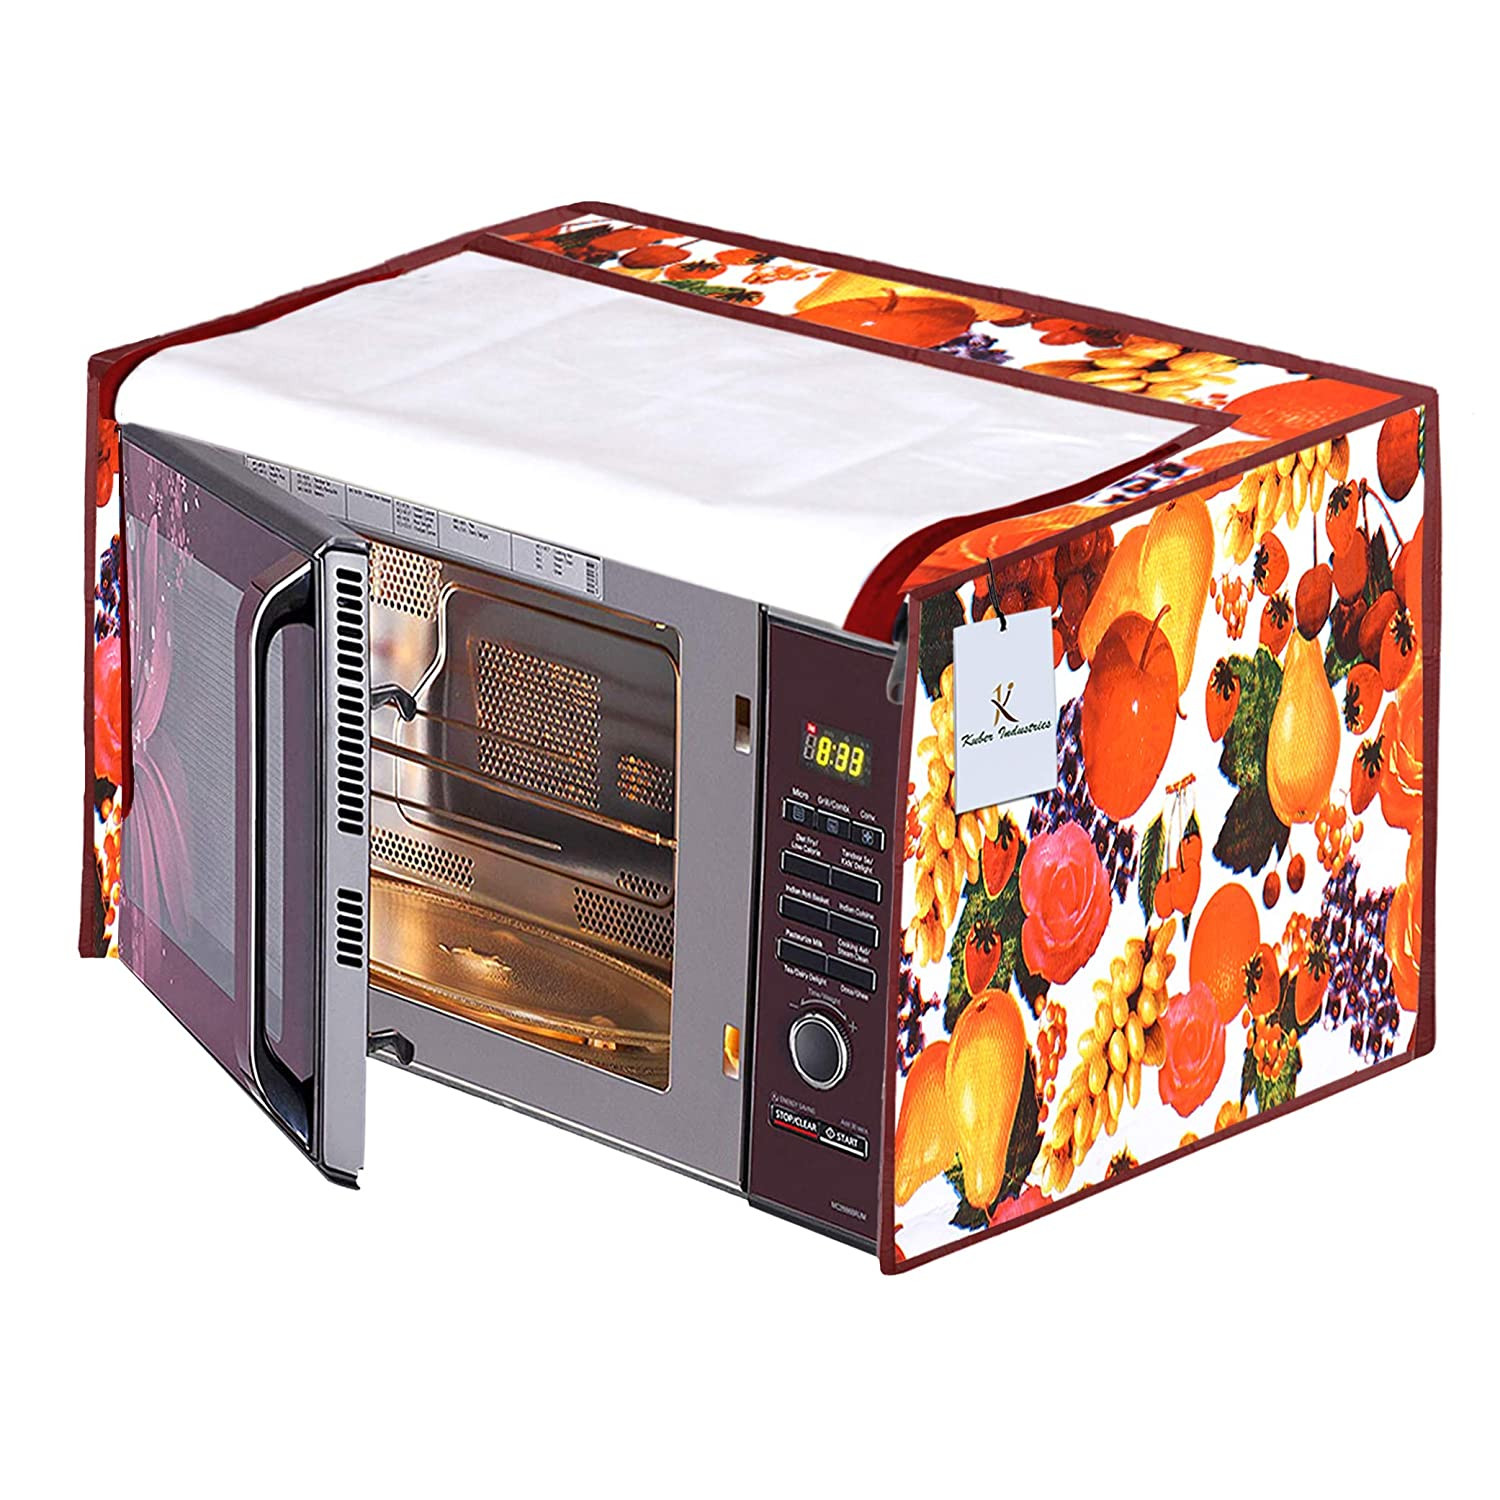 Kuber Industries PVC Fruit Printed Microwave Oven Cover,20 Ltr. (Multicolor)-HS43KUBMART26025